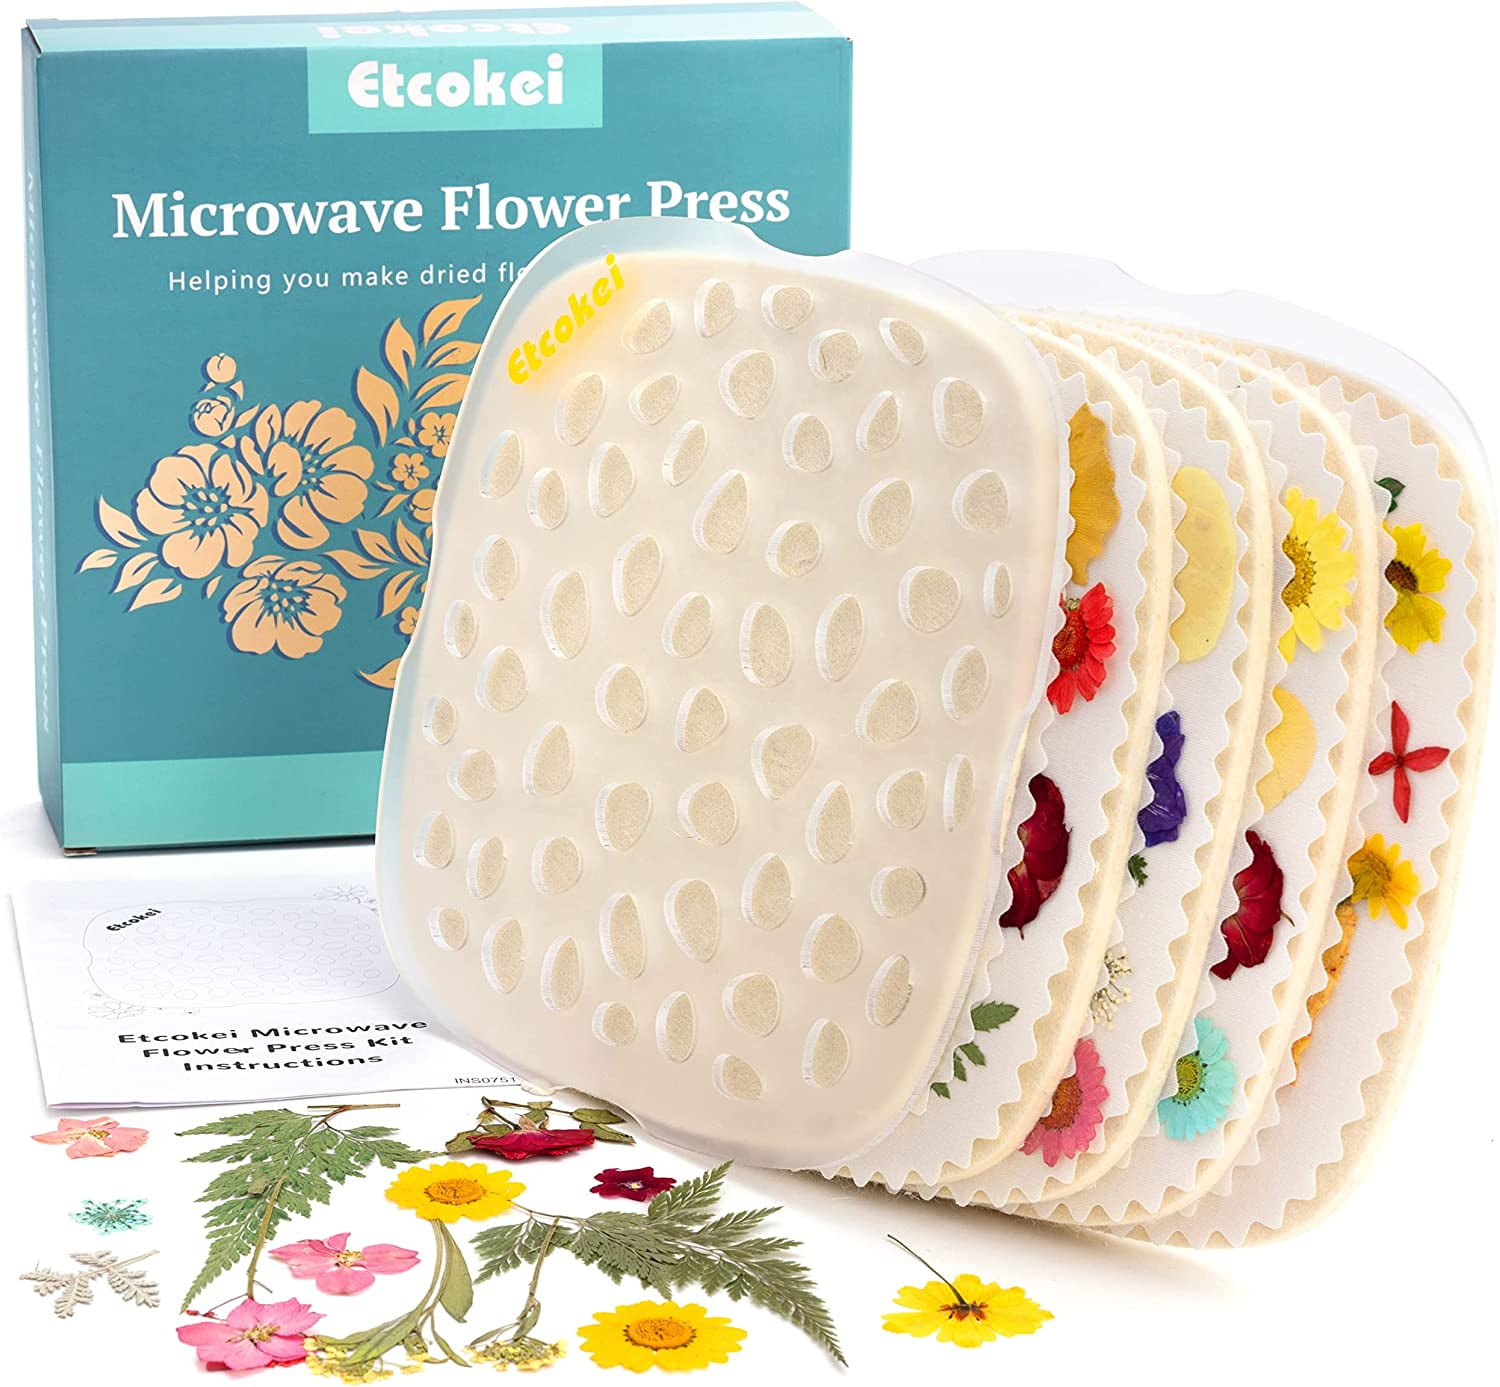 New Botanical Science Spring Flower Drying Kit Easy Microwavable